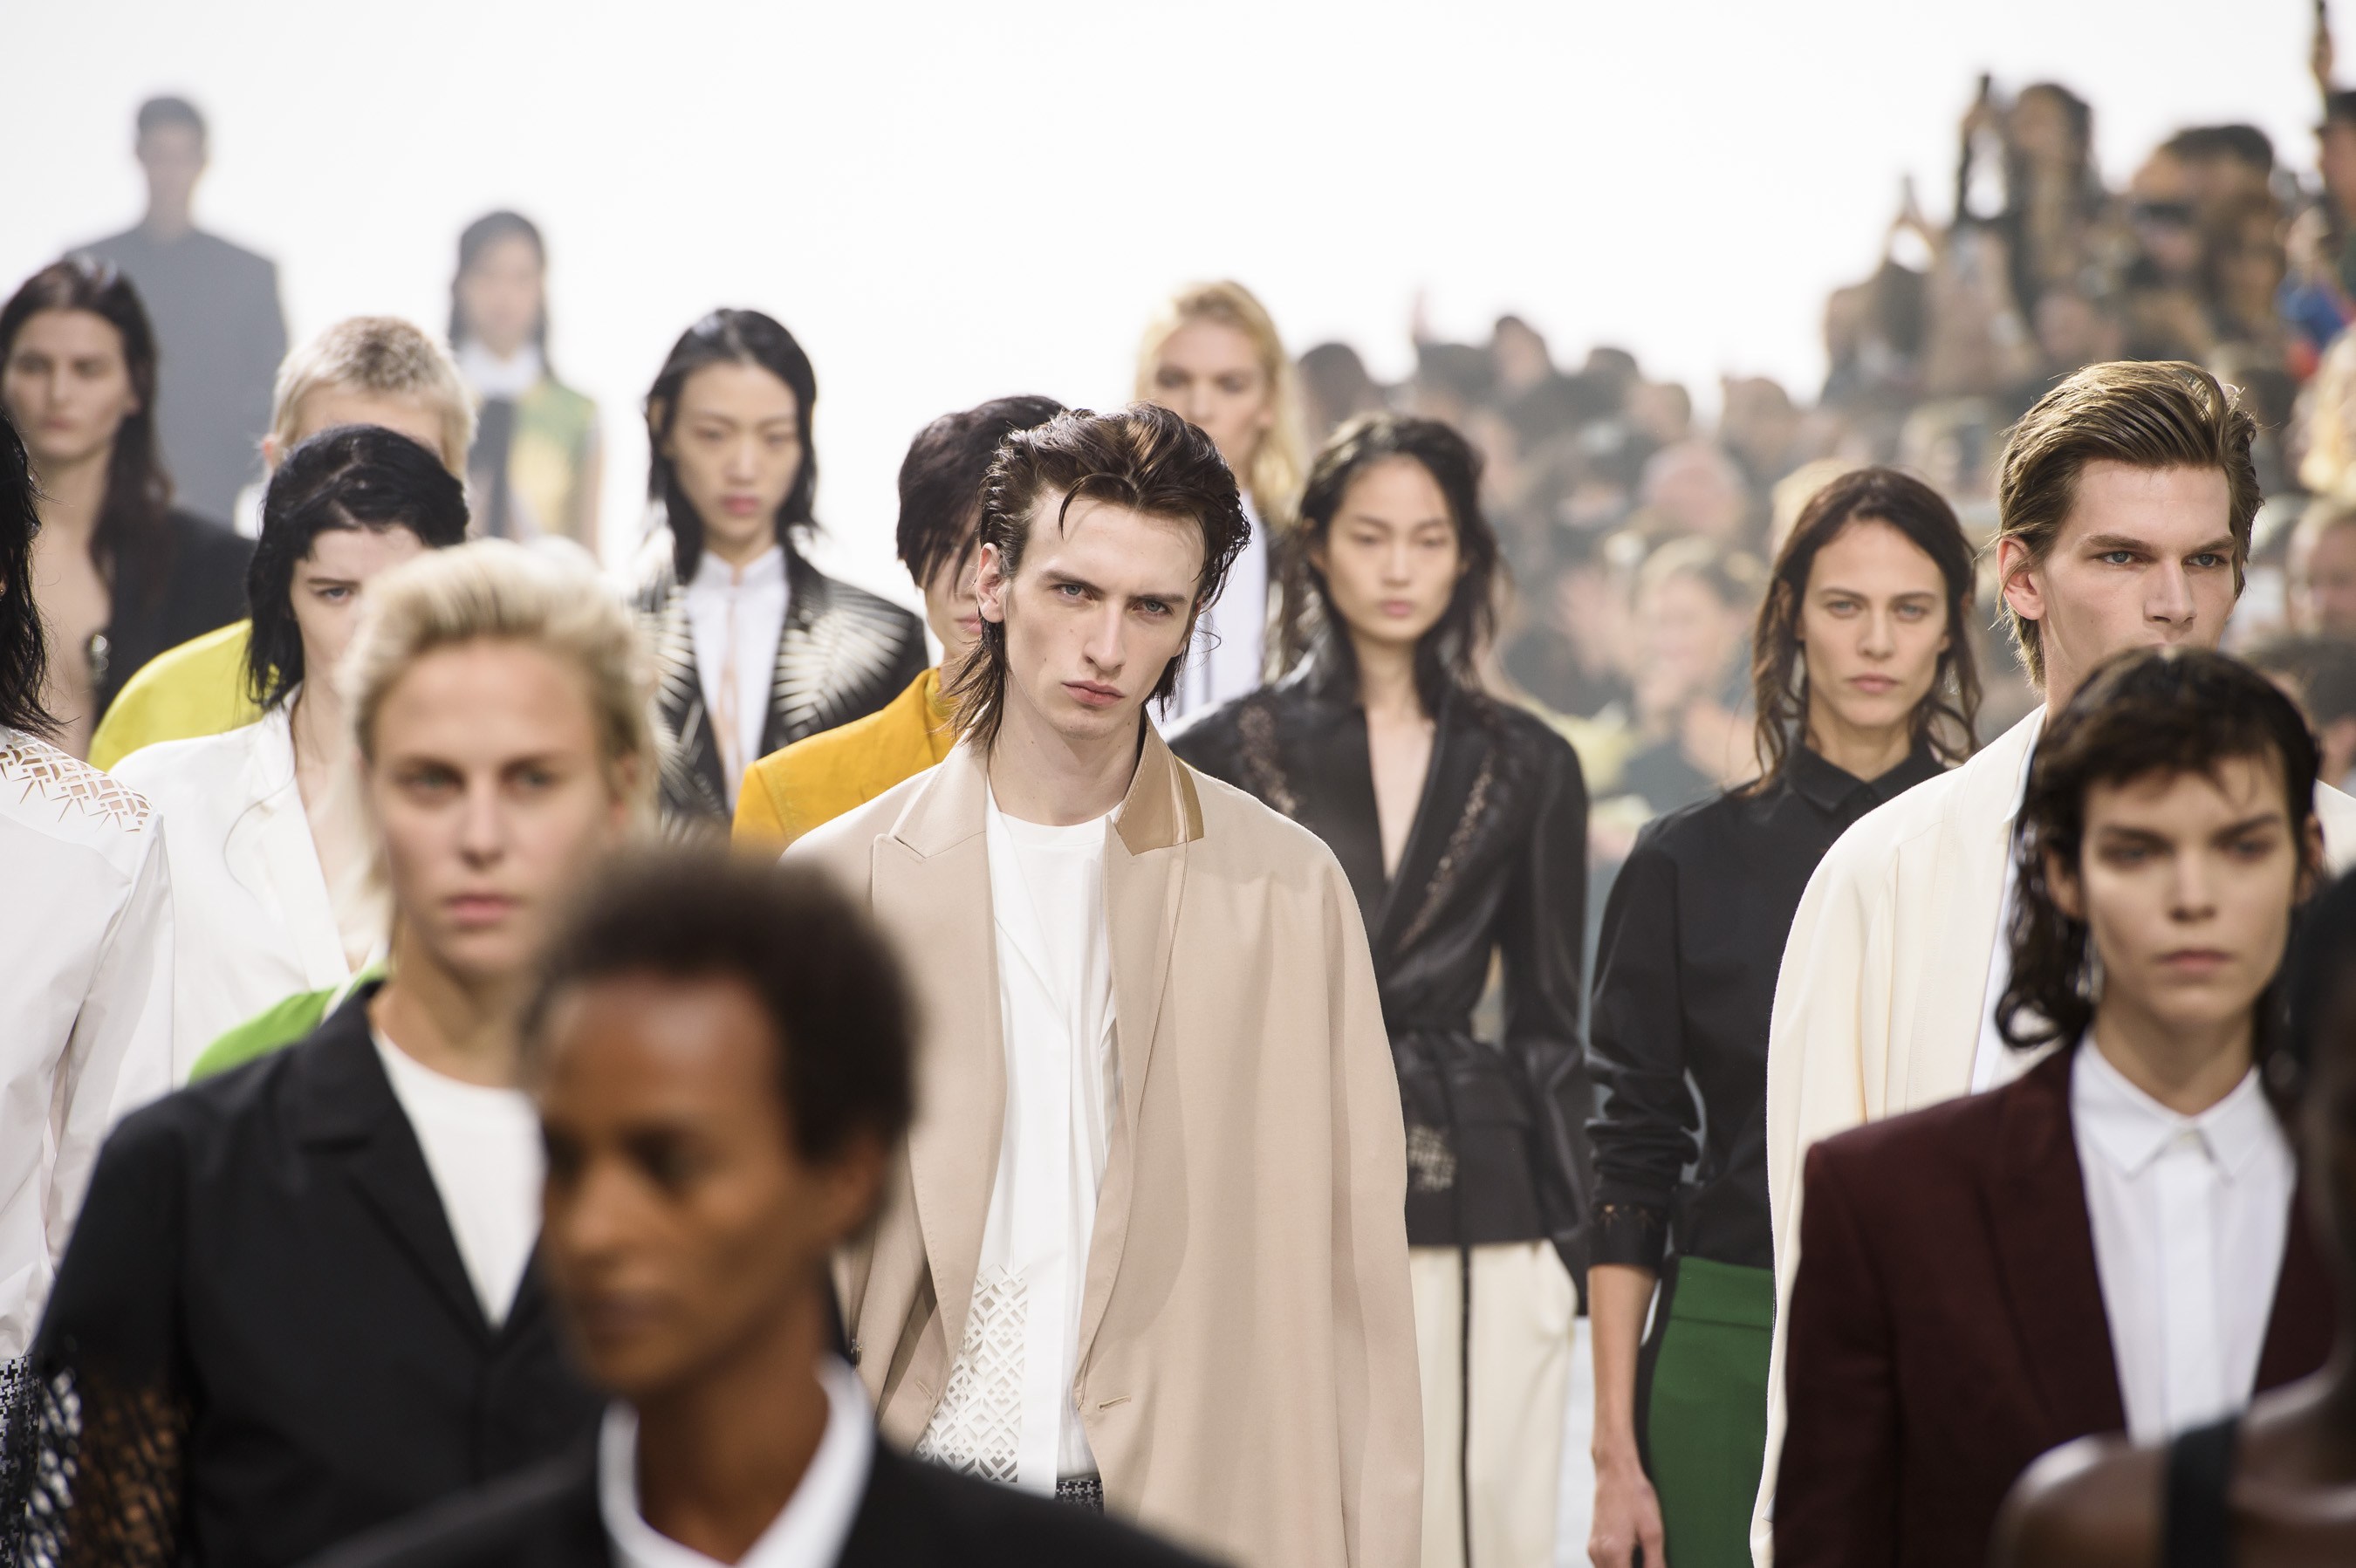 Top 10 Paris Spring 2019 Collections and Fashion Shows - The Impression